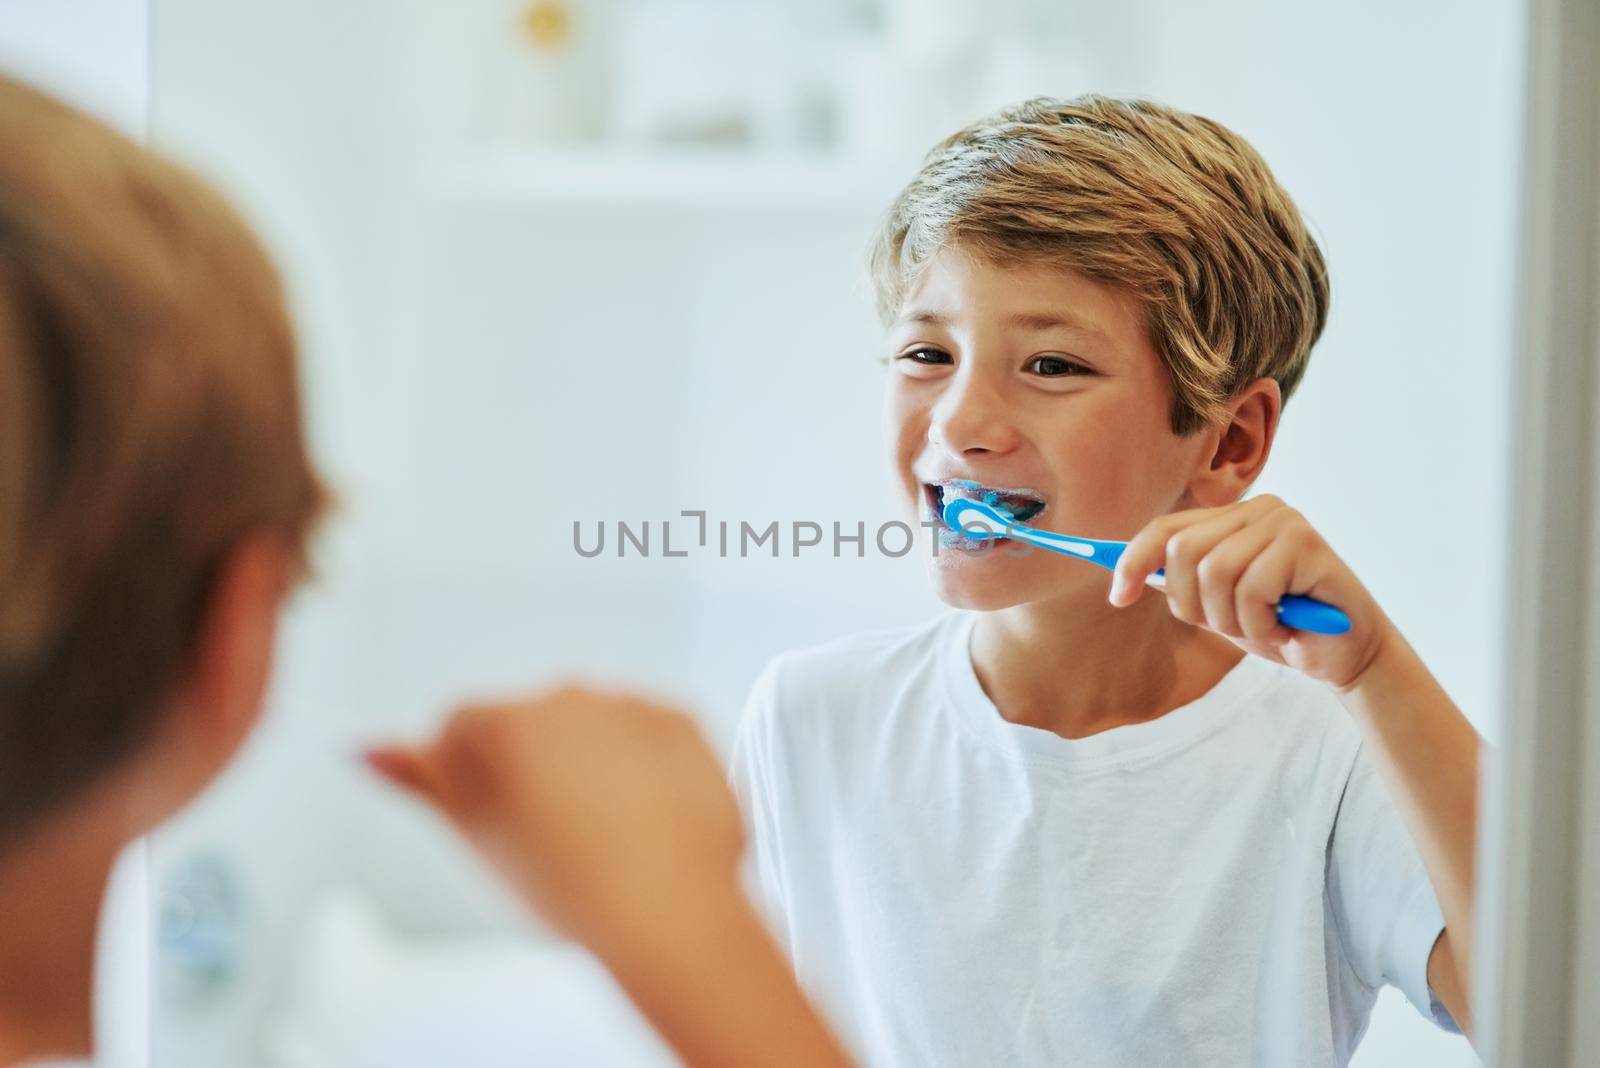 Brushing your teeth is an important routine. a cheerful young boy looking at his reflection in a mirror while brushing his teeth in the bathroom at home during the day